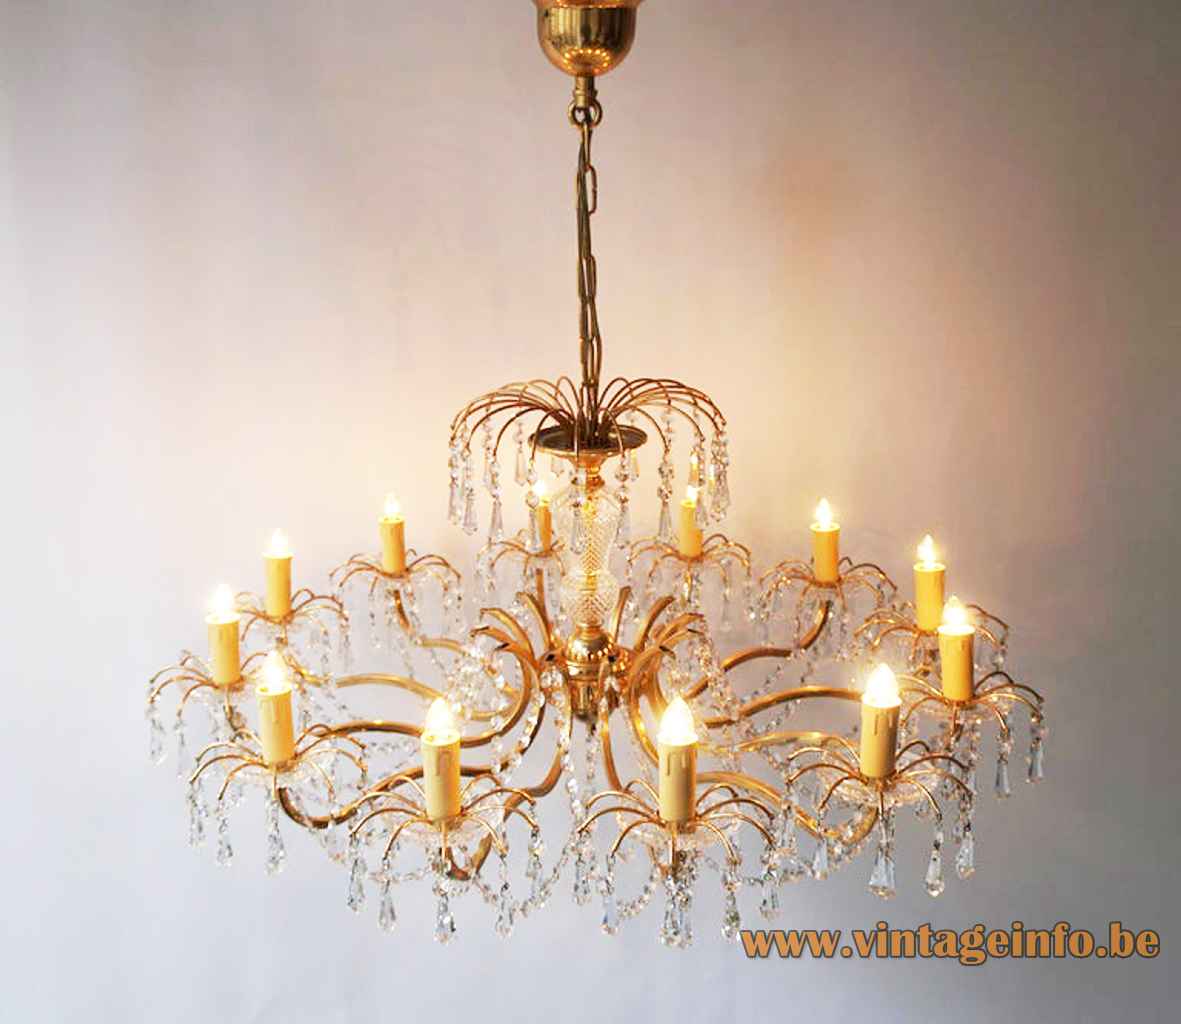 1970s crystal glass chandelier cut glass beads & pearls lampshade curved brass rods metal chain Massive Belgium